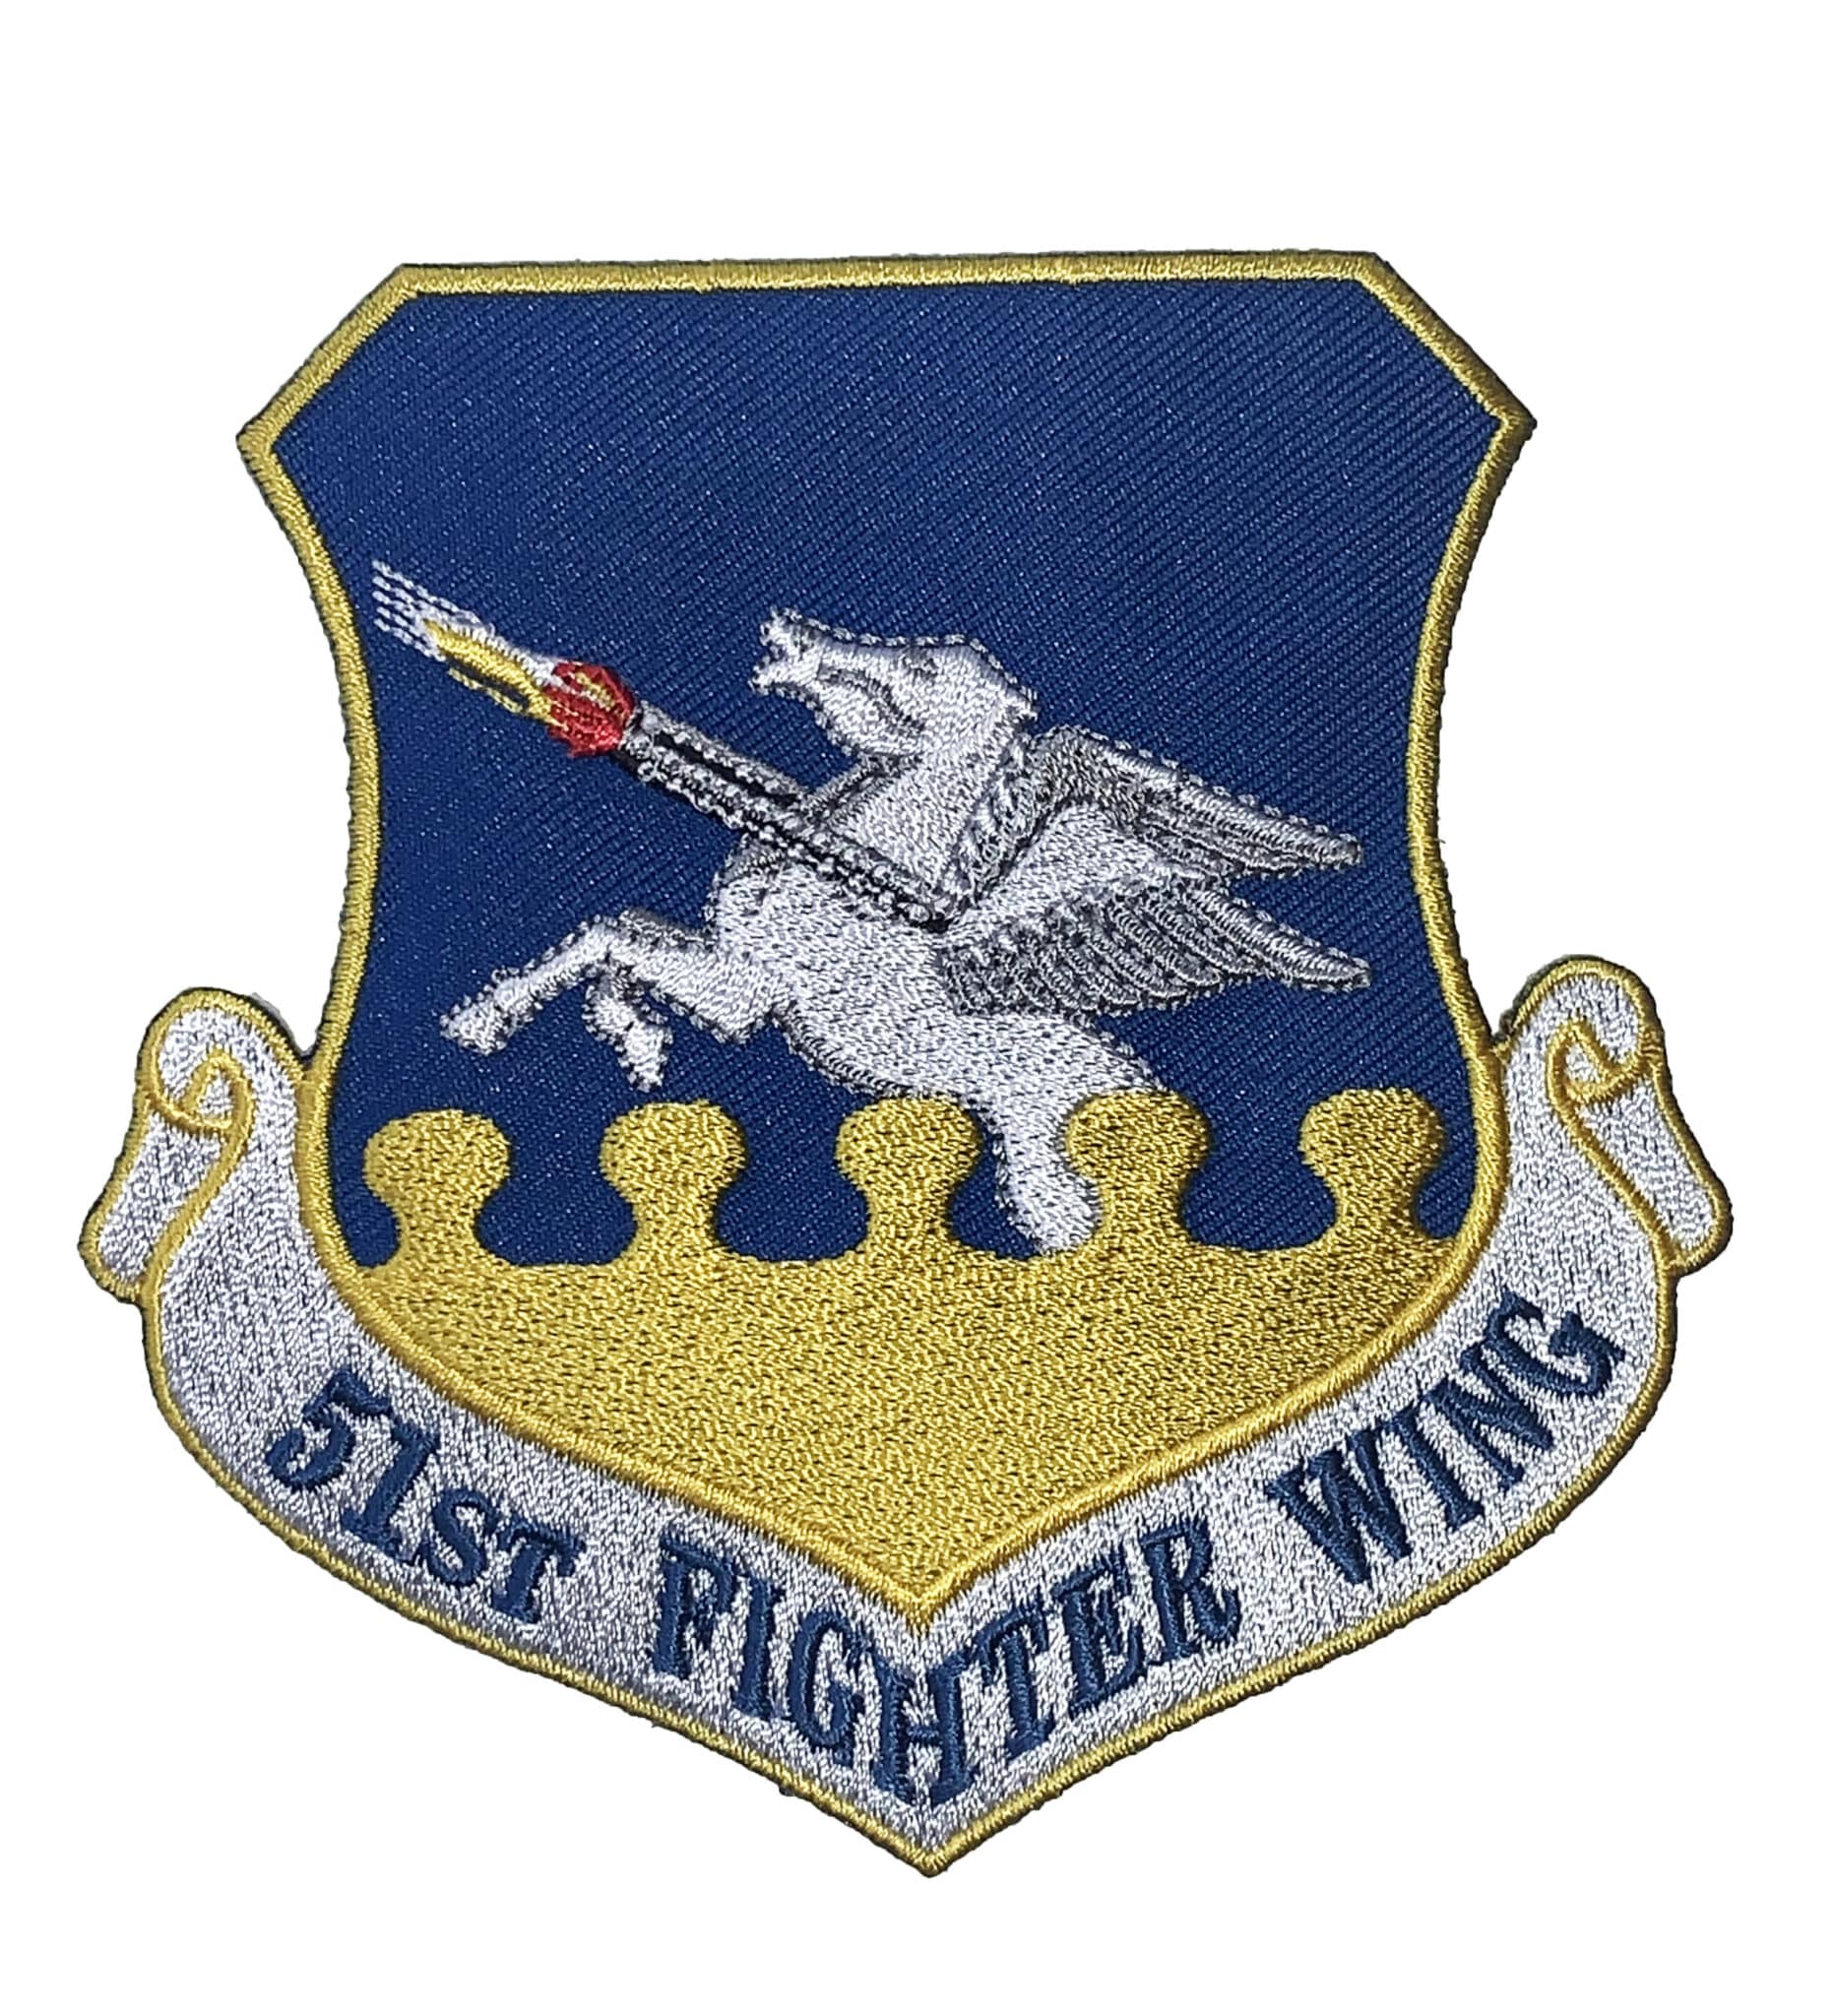 51st Fighter Wing Patch – Plastic Backing